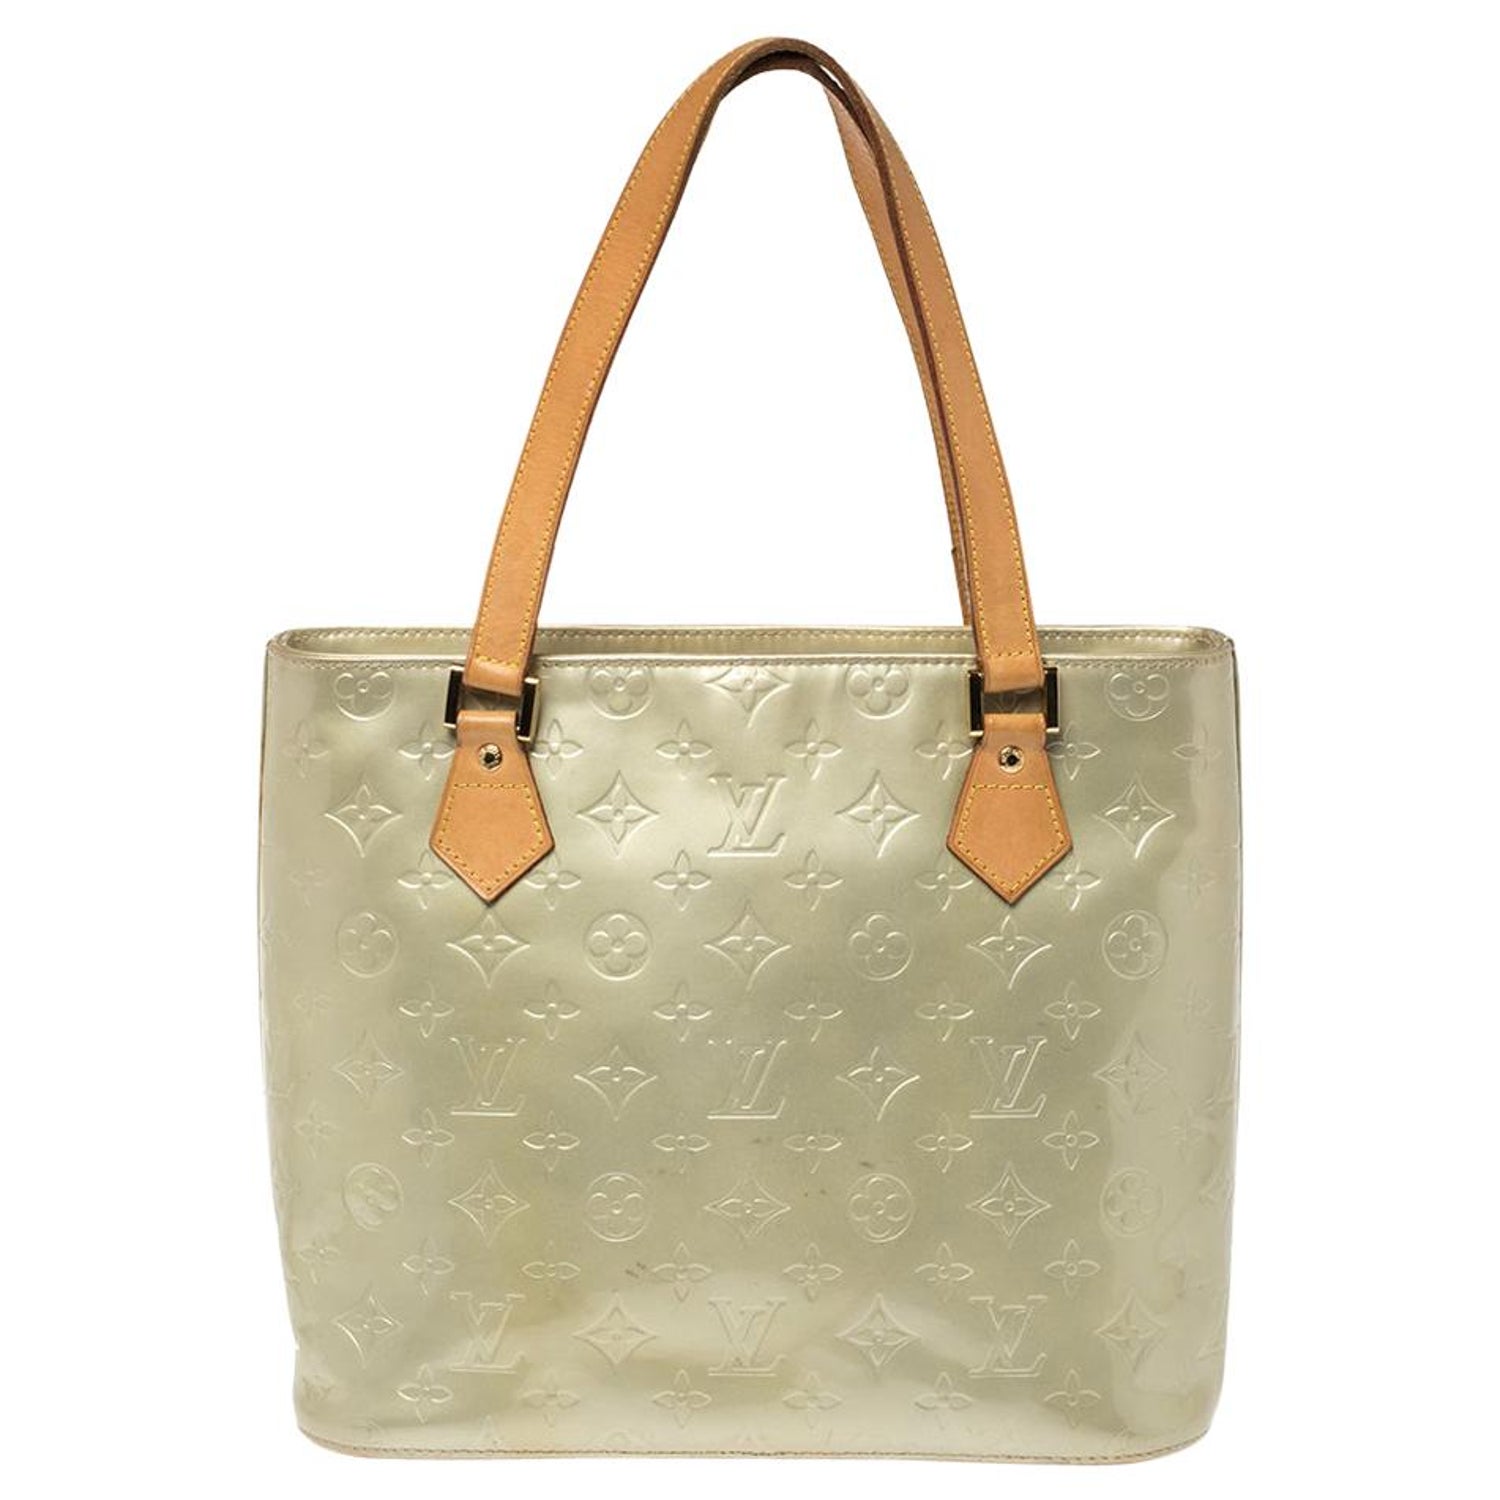 Ayala Malls - Exquisite crocodile leather bags by Louis Vuitton